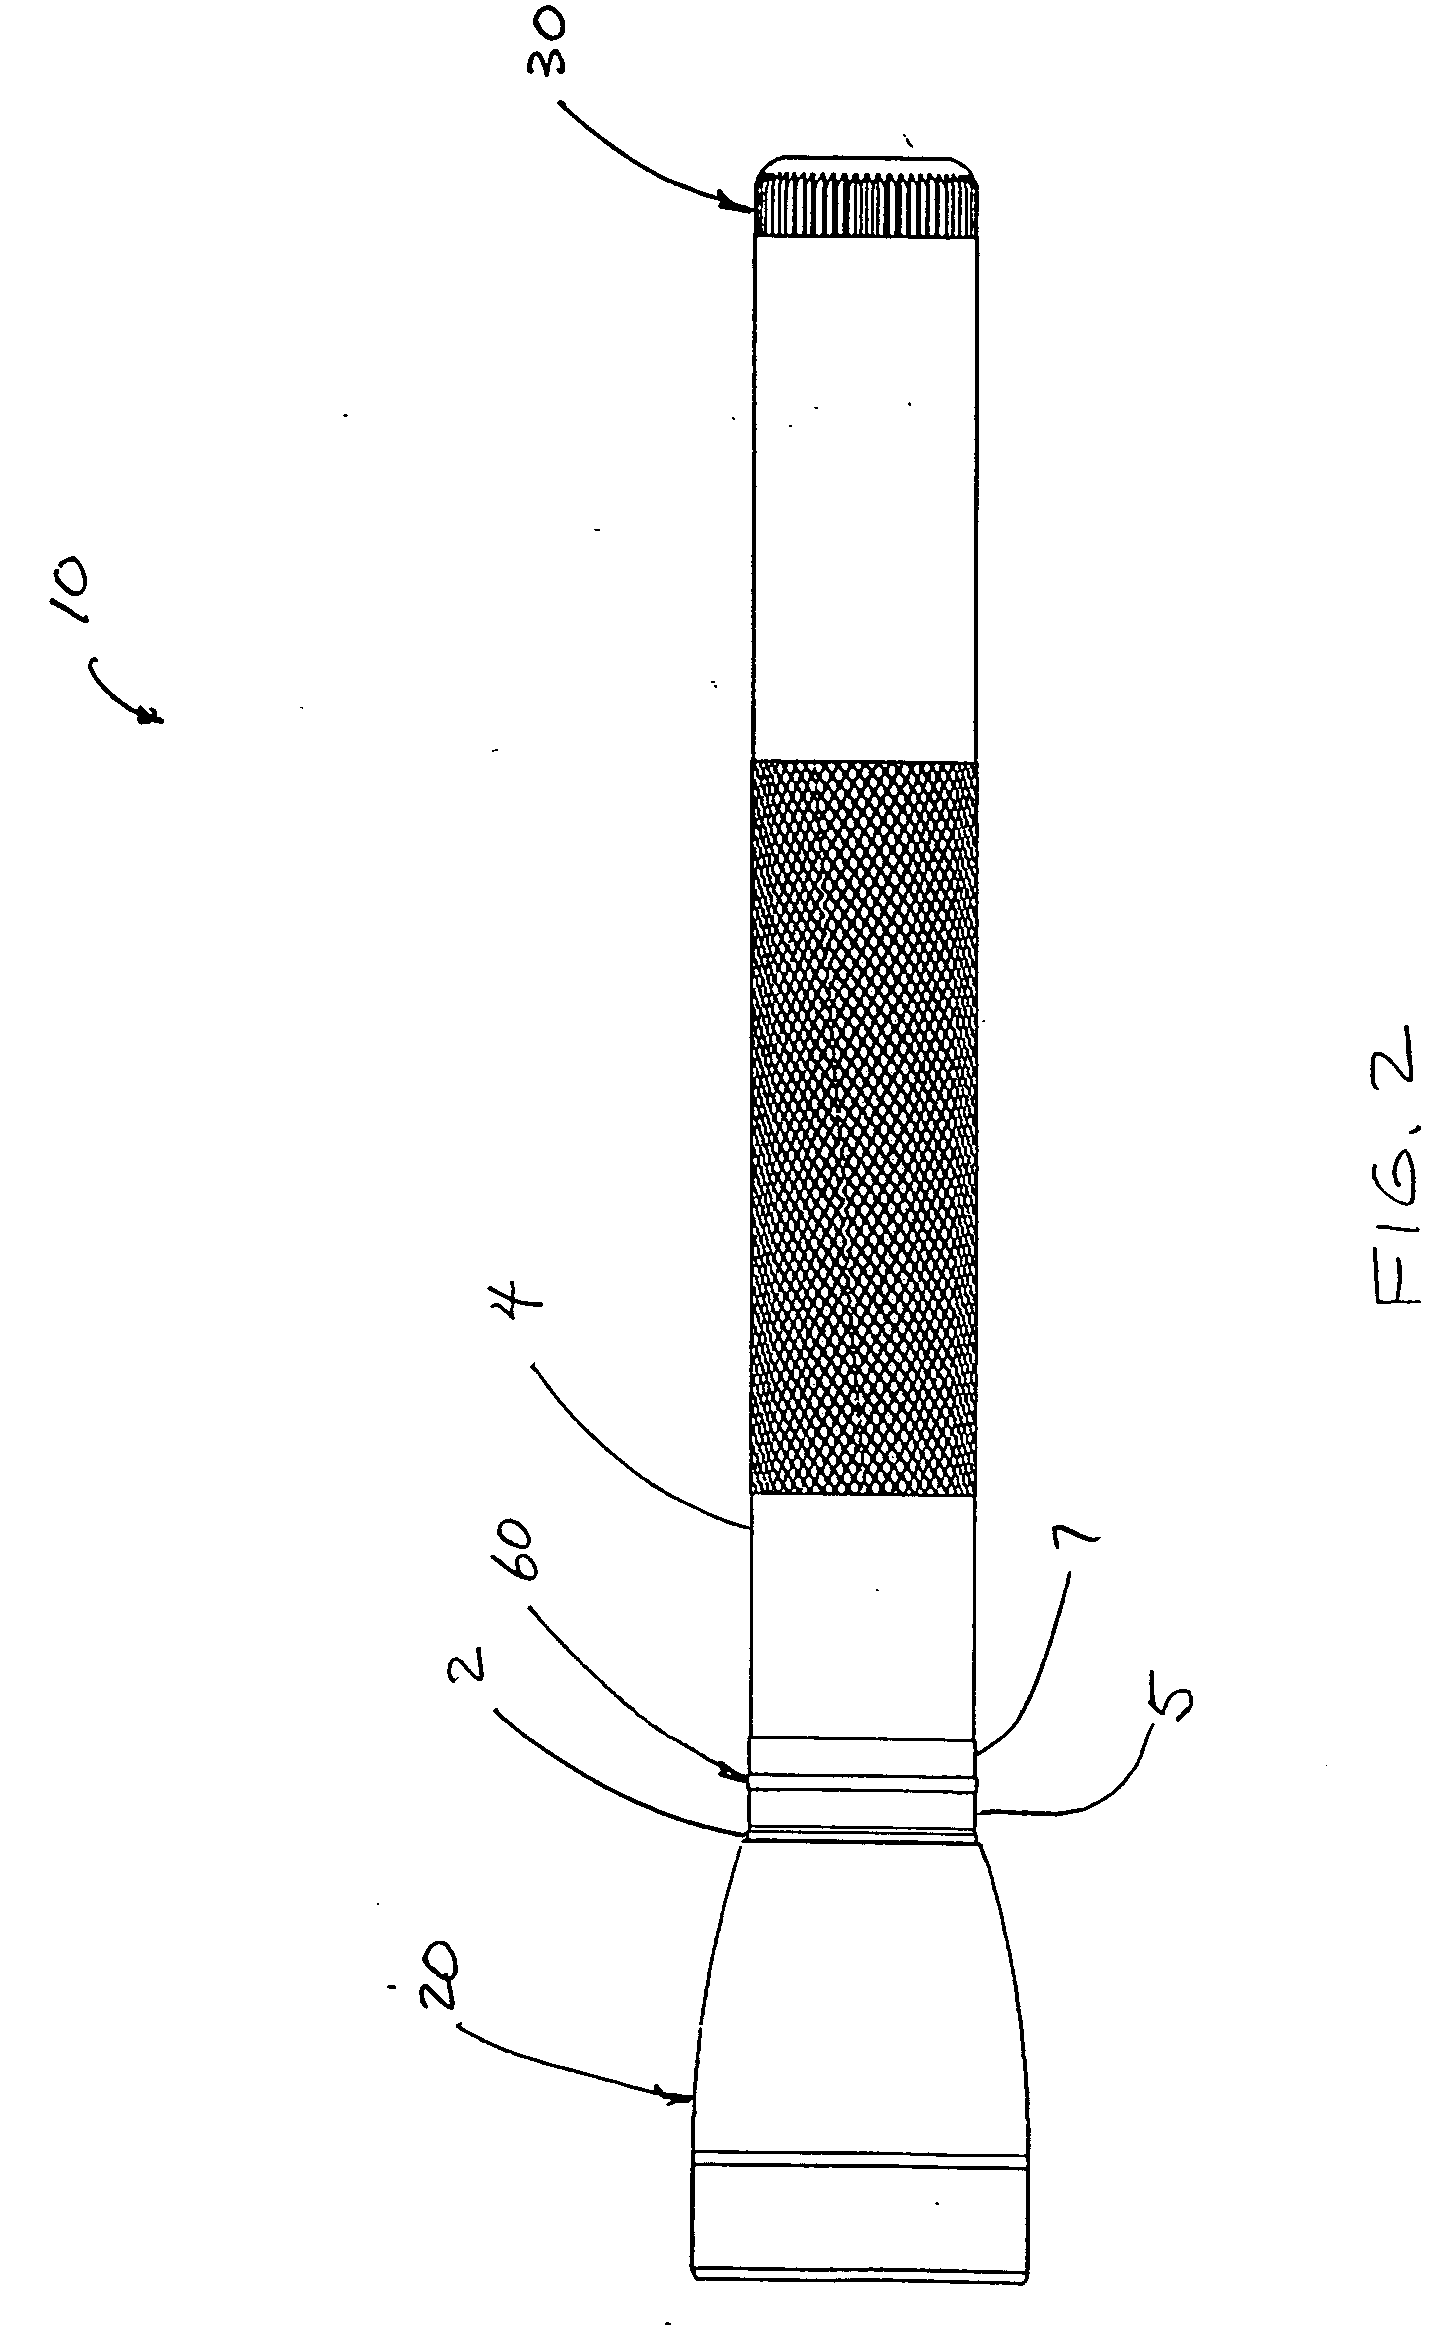 Apparatus and method for aligning a substantial point source of light with a reflector feature